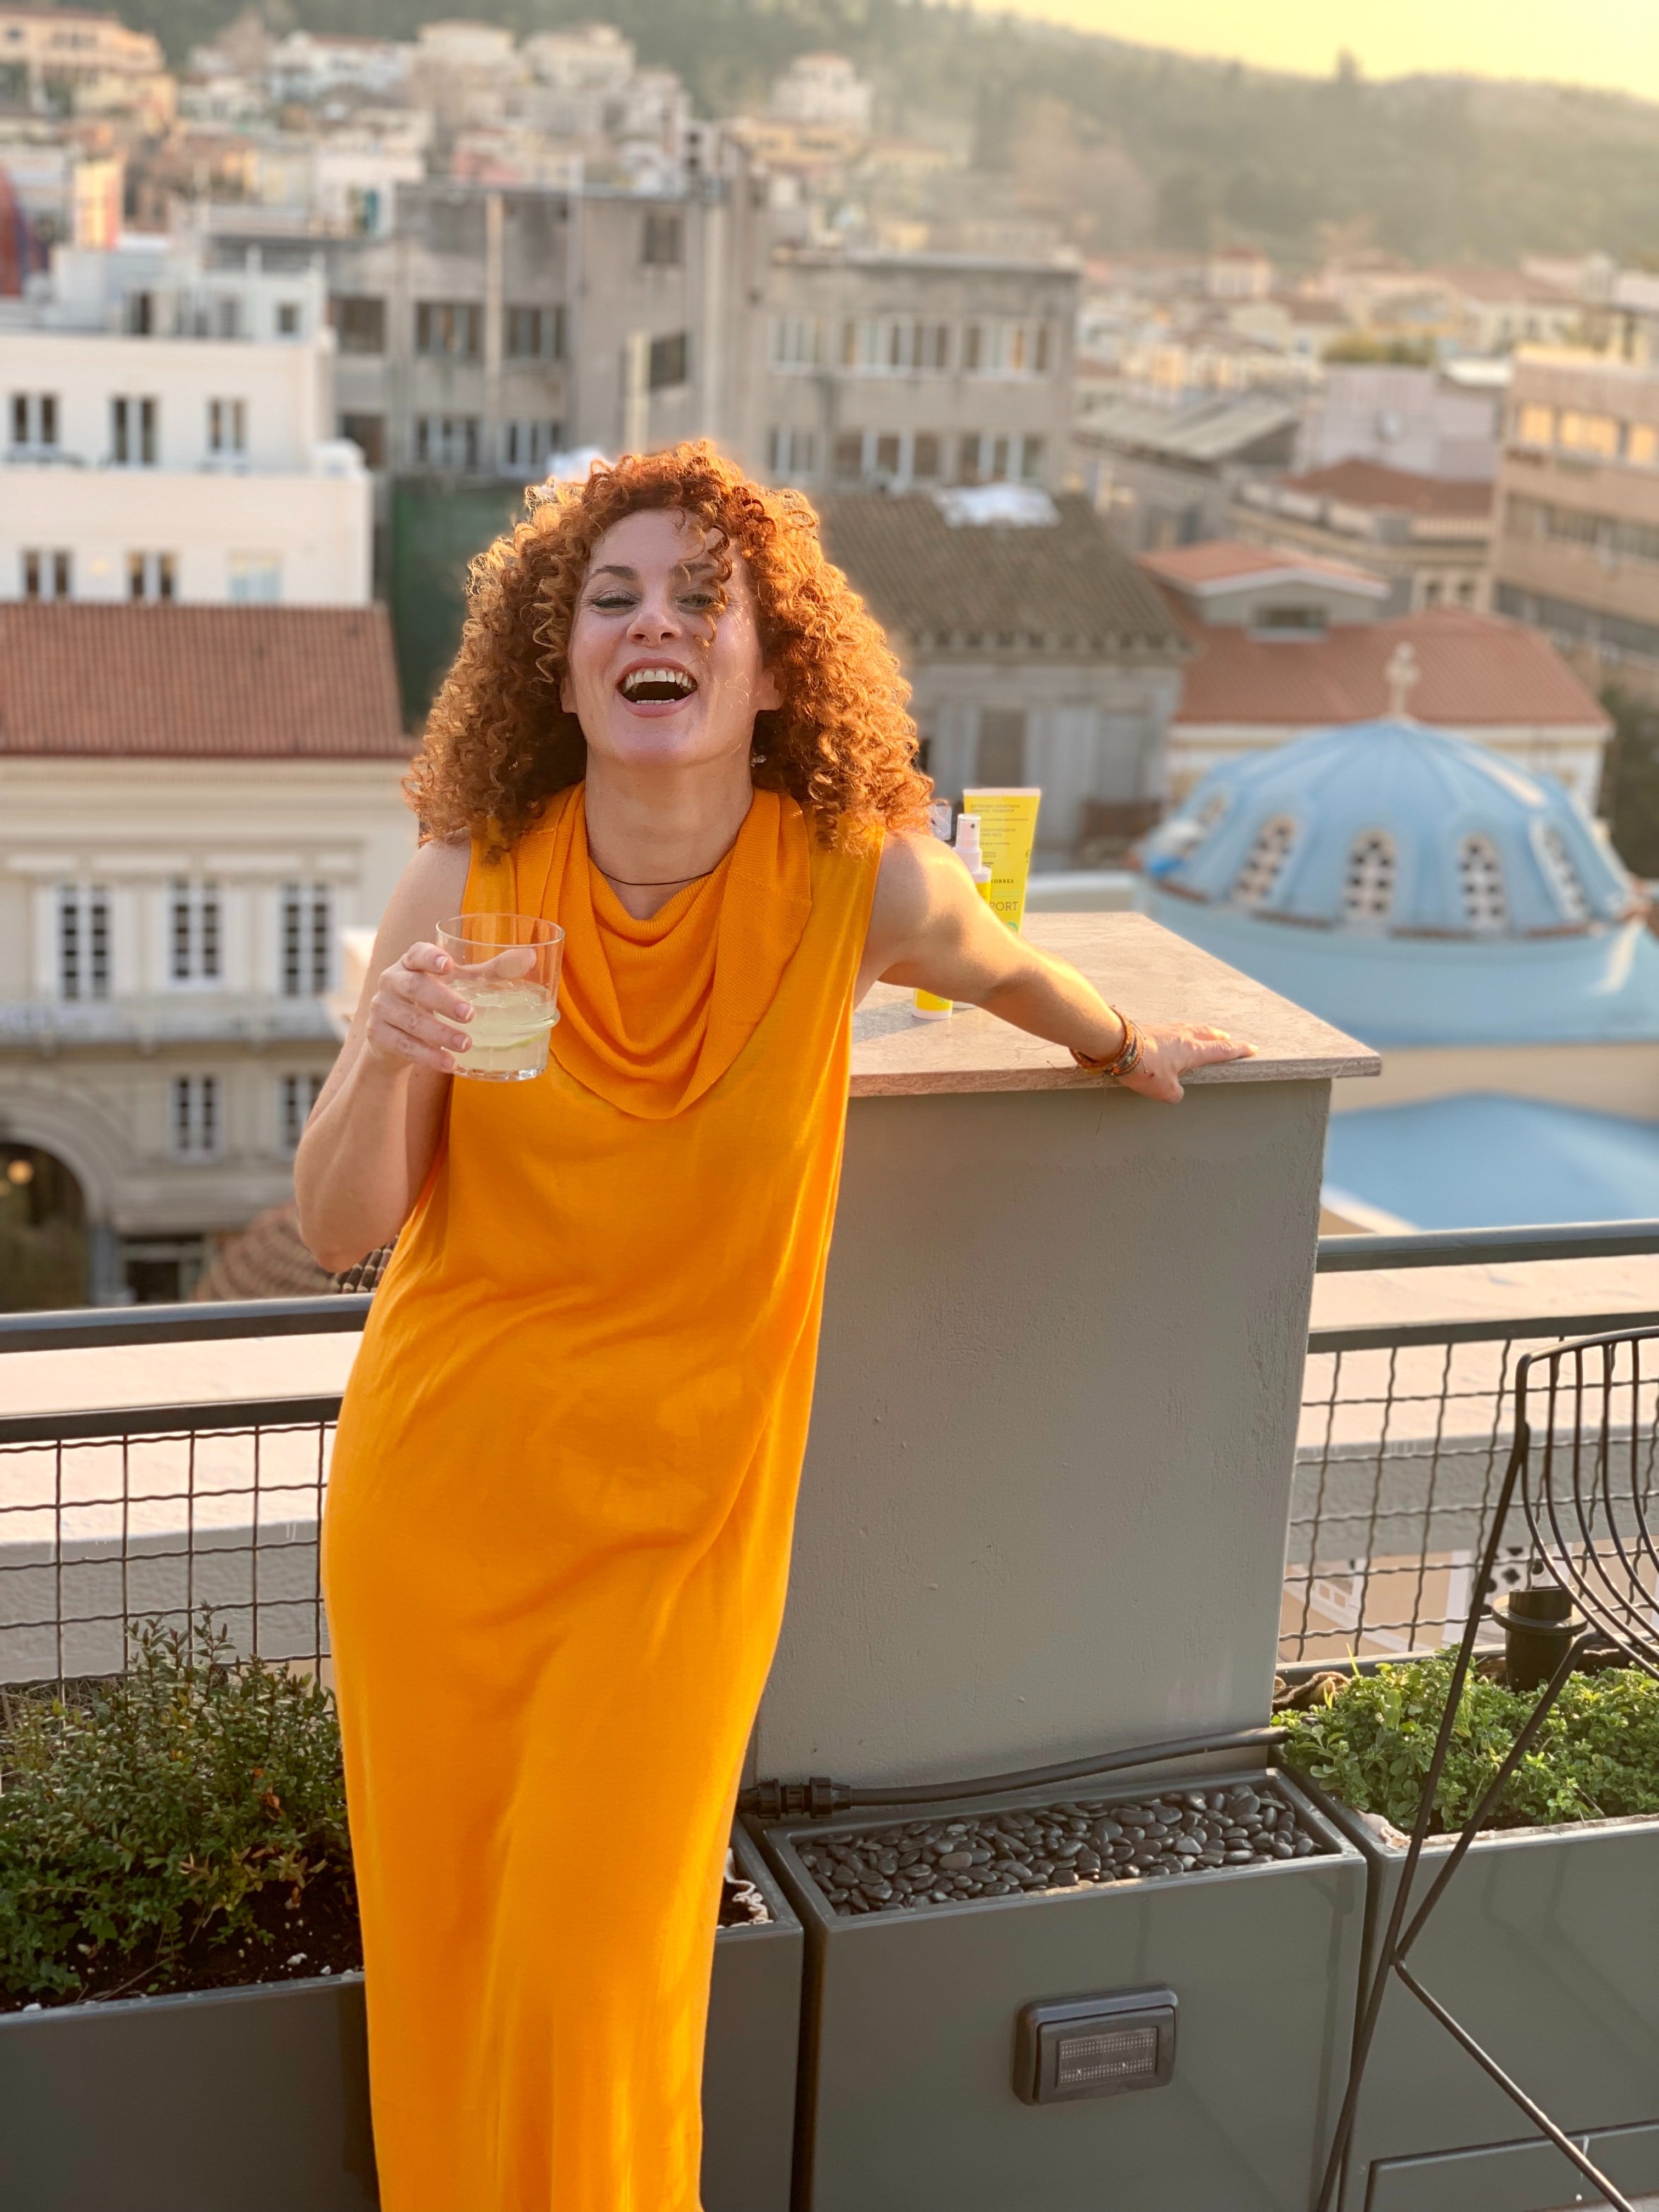 A happy woman poses on a balcony. | Source: Pexels